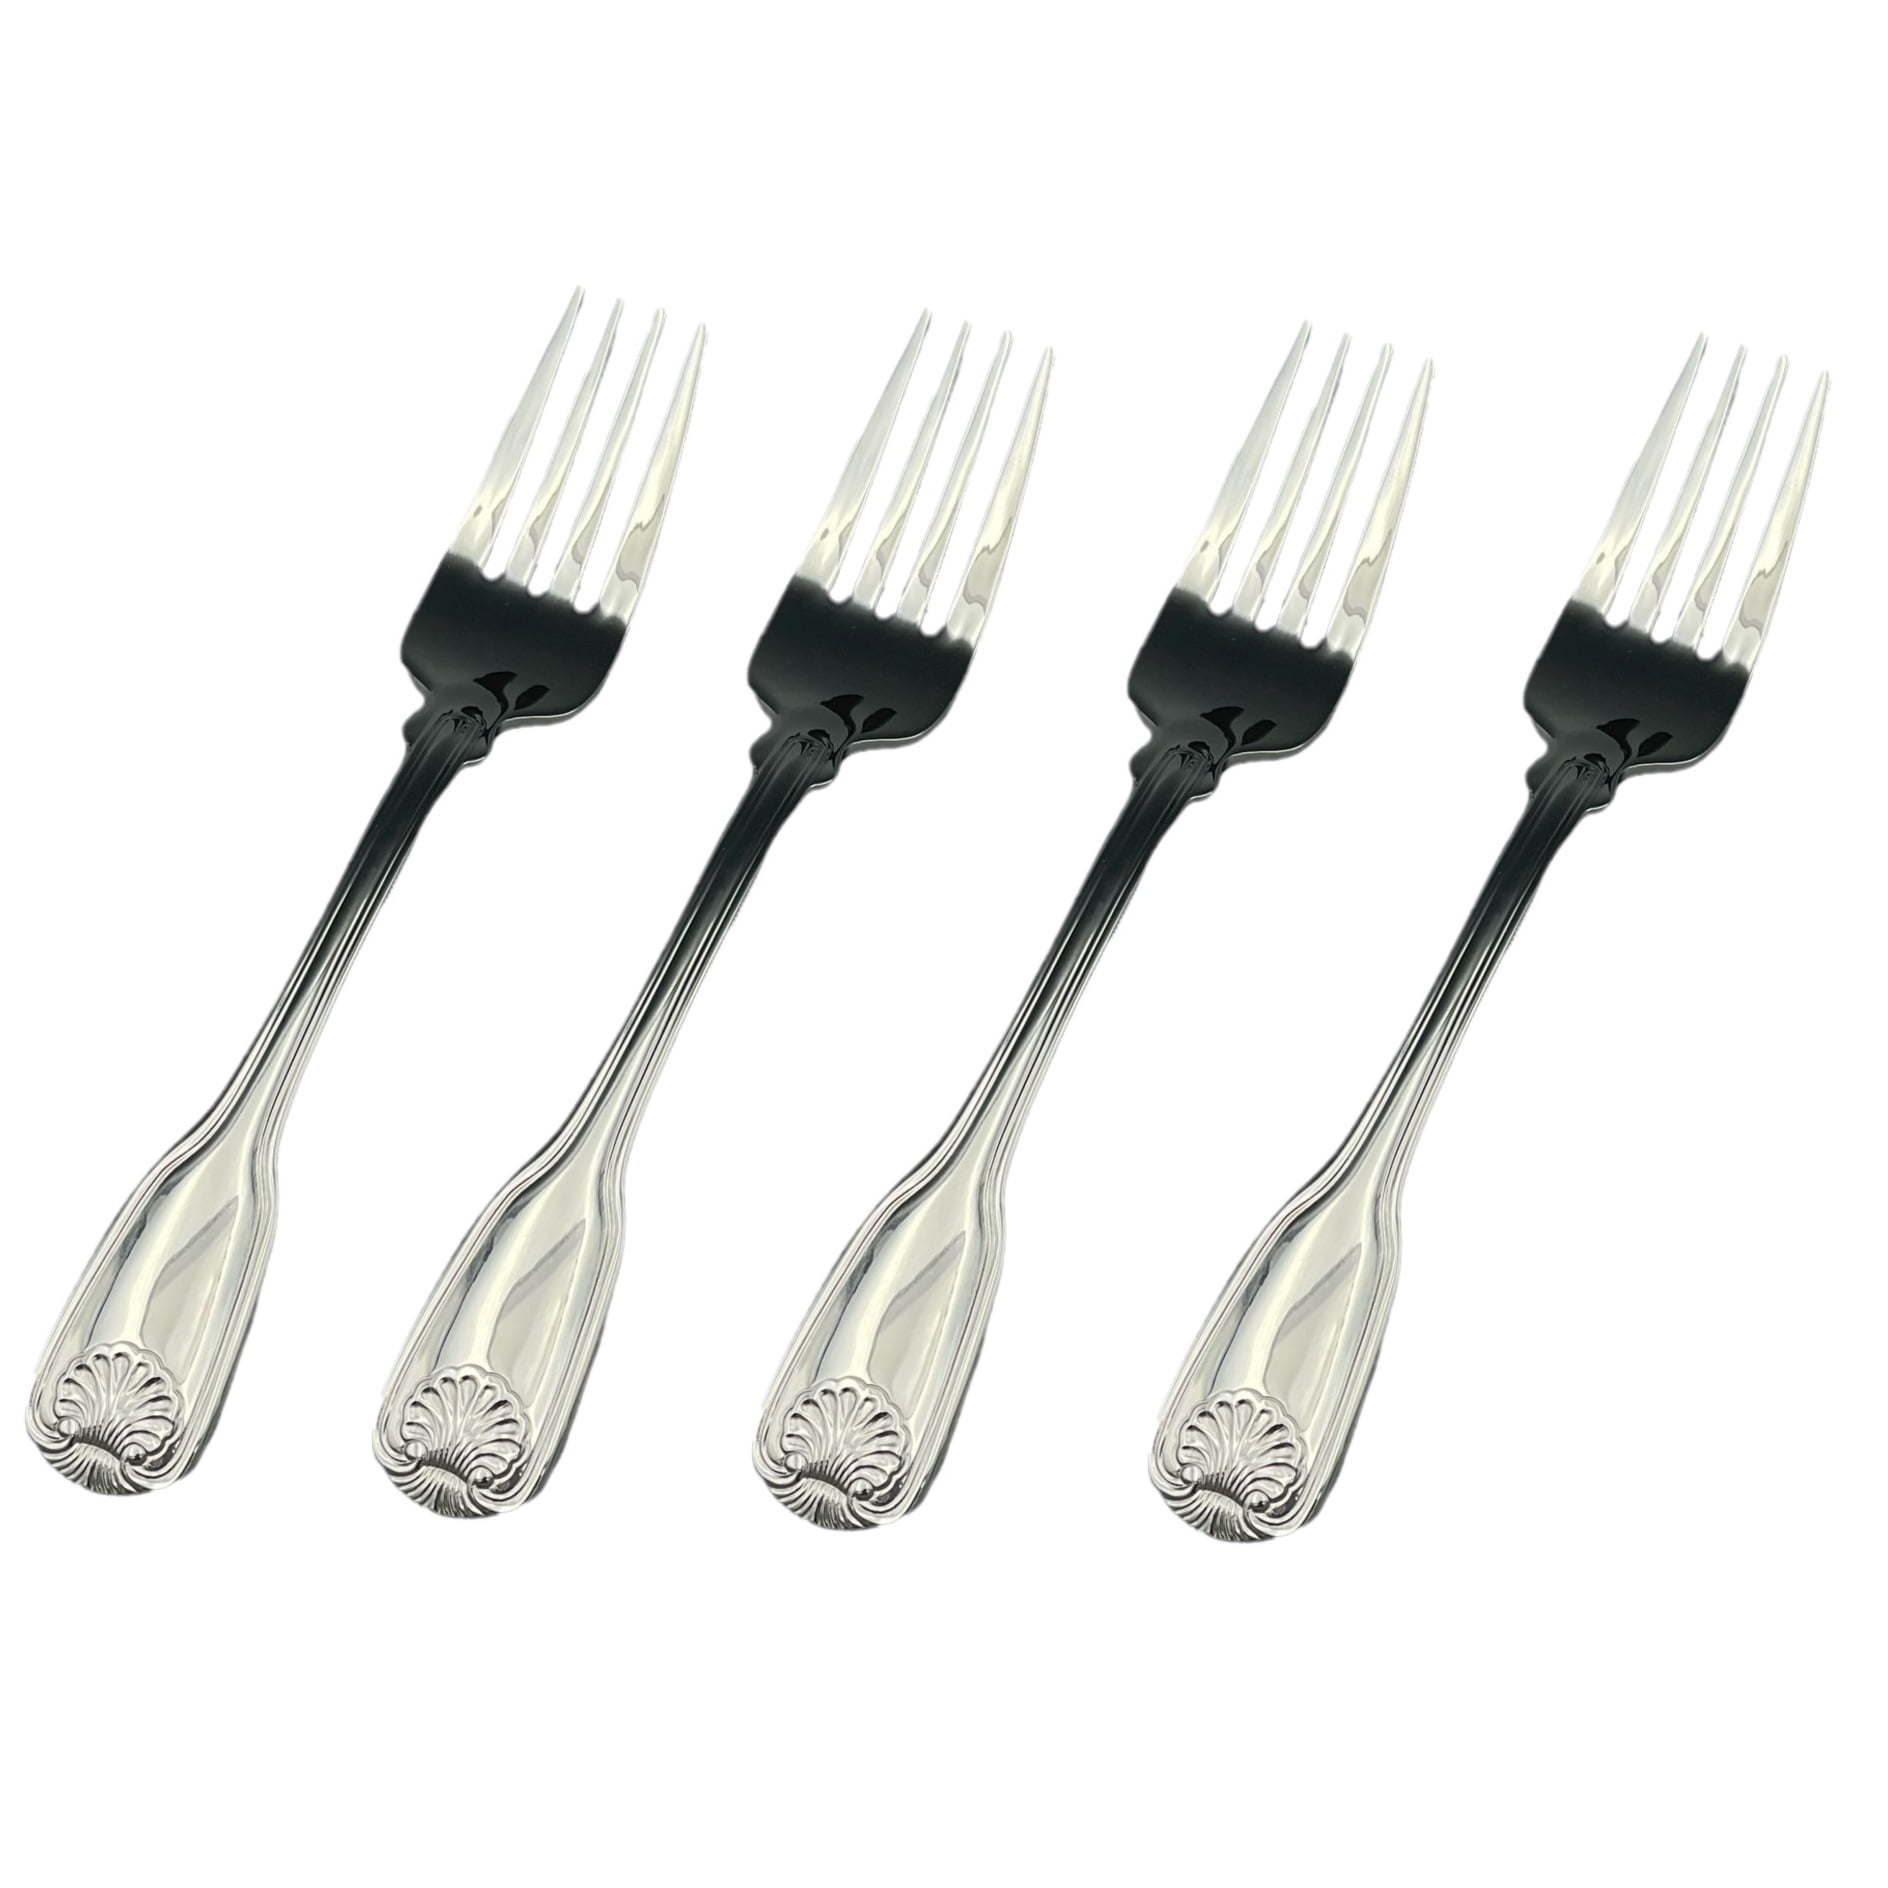 Set of Four Reed & Barton Stainless Williamsburg Royal Shell 6 1/8" Teaspoons